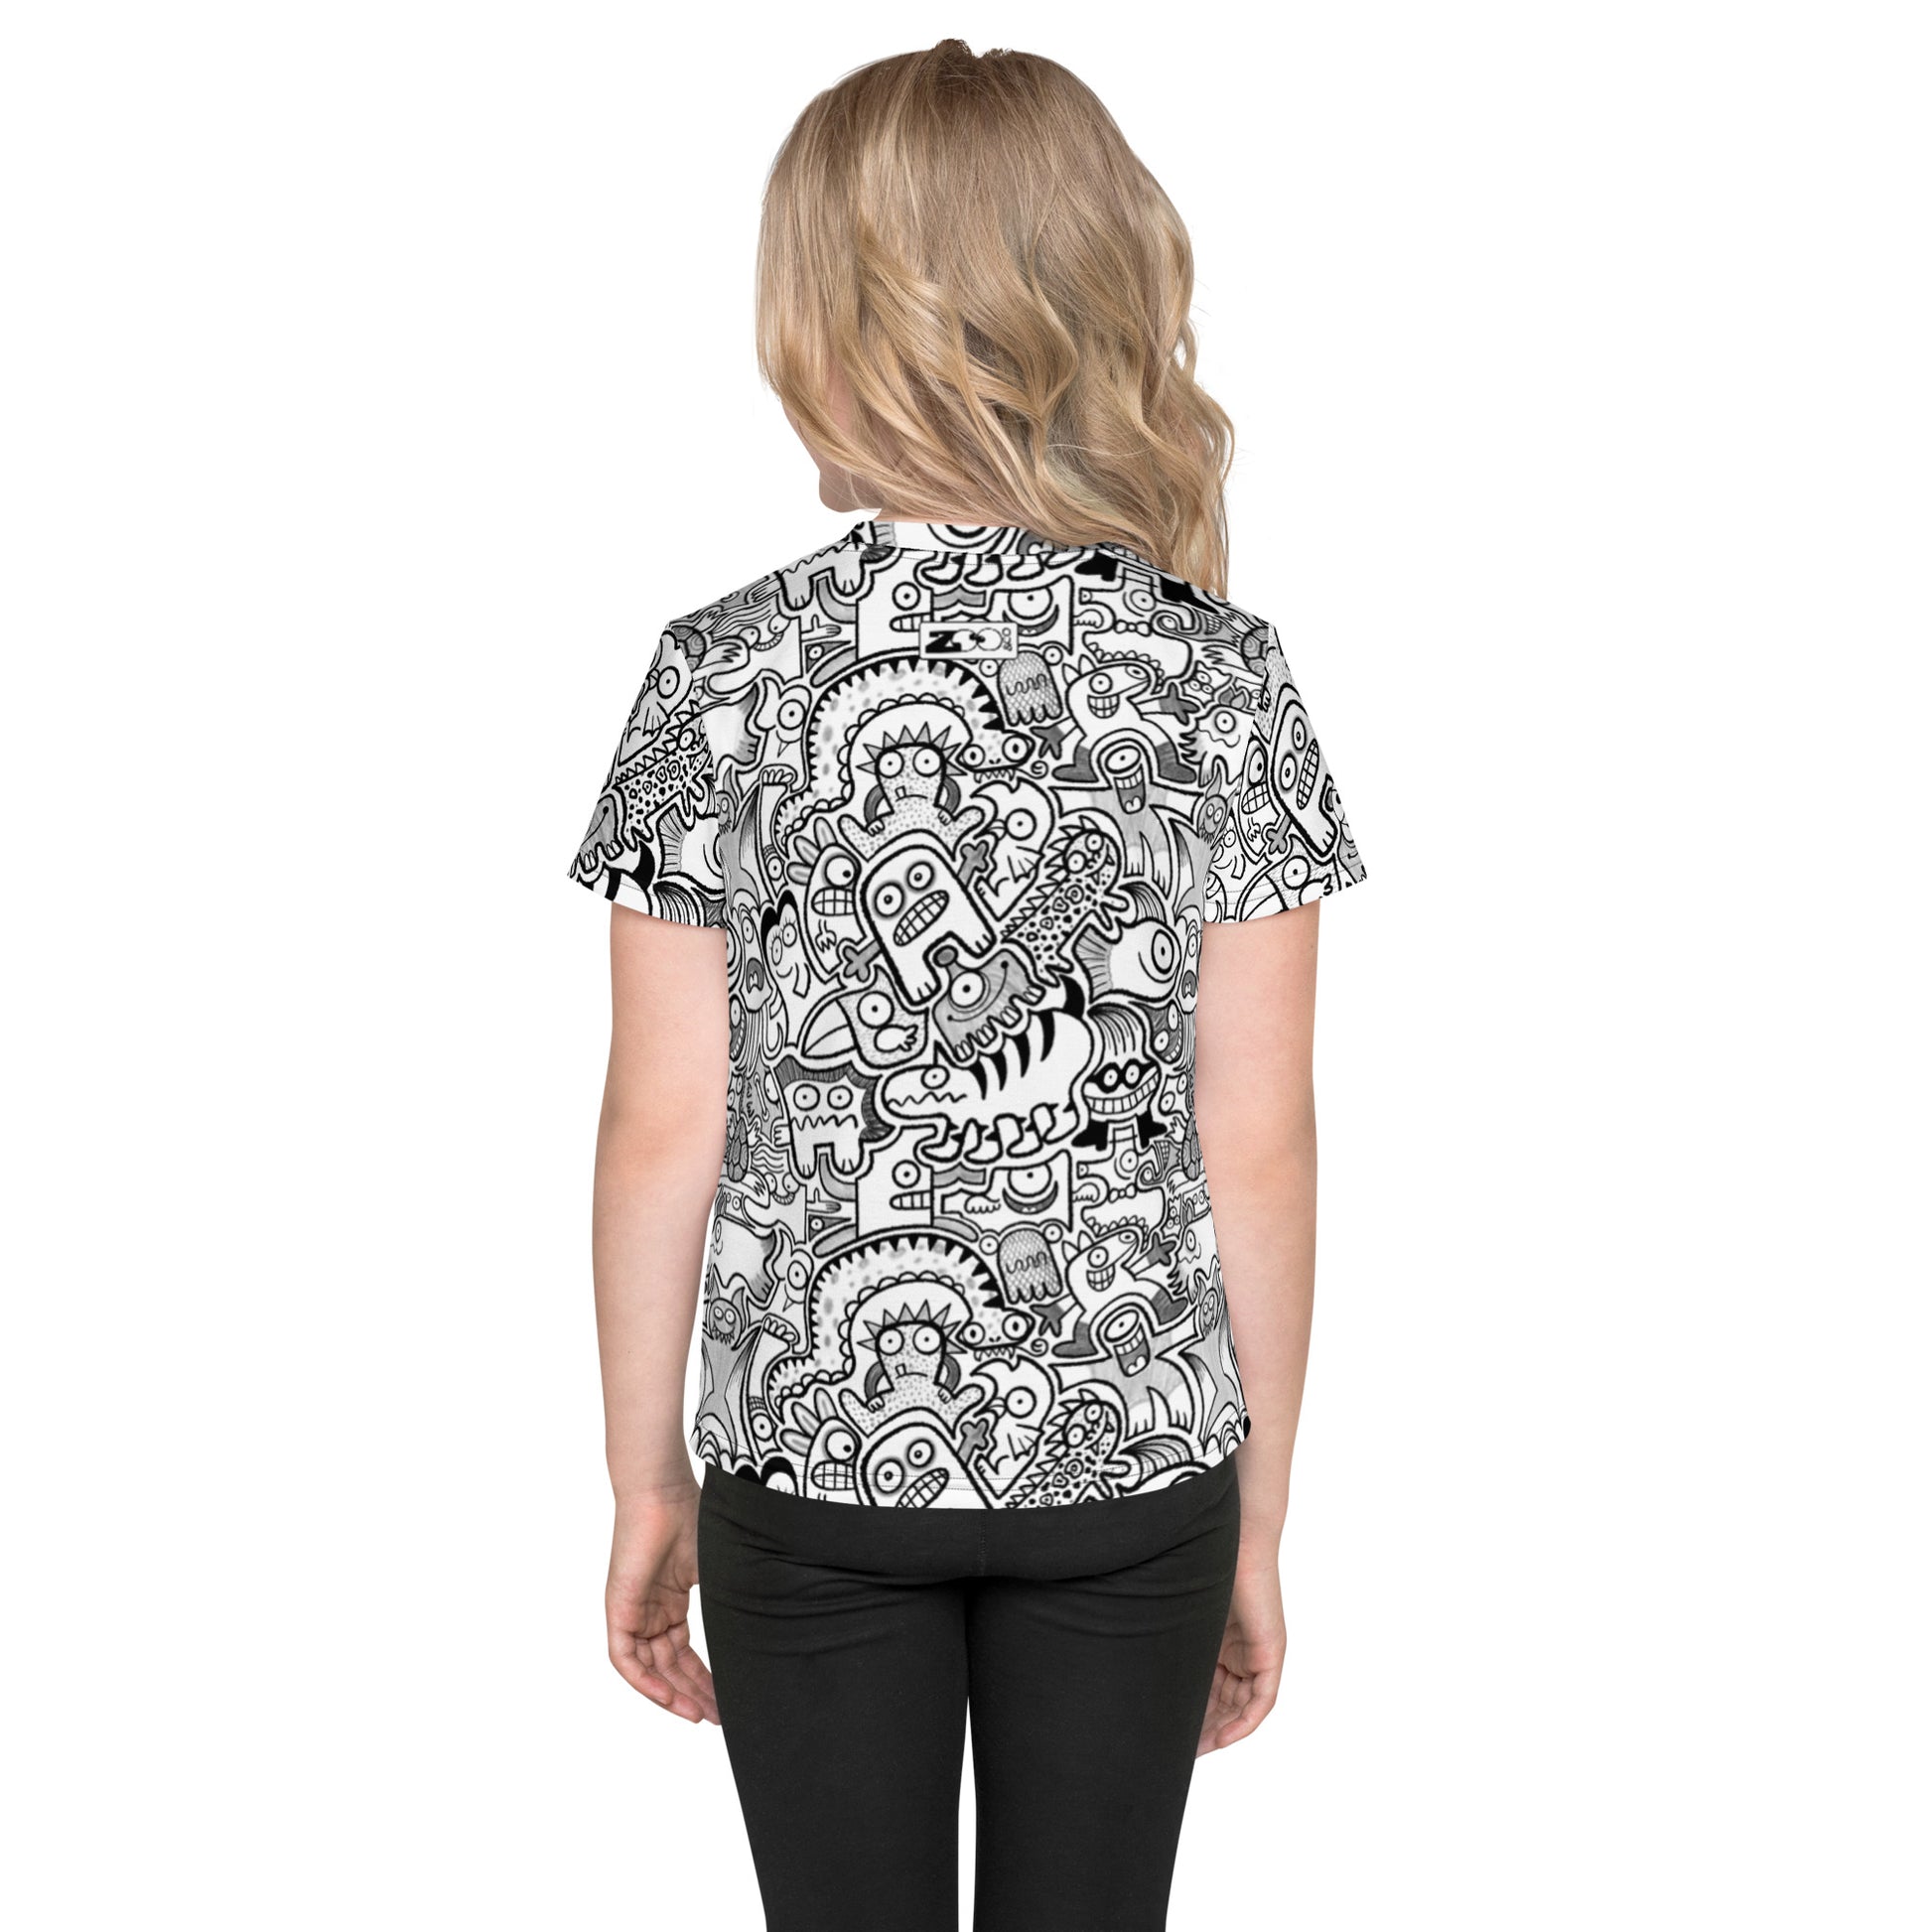 Fill your world with cool doodles Kids crew neck t-shirt. Back view